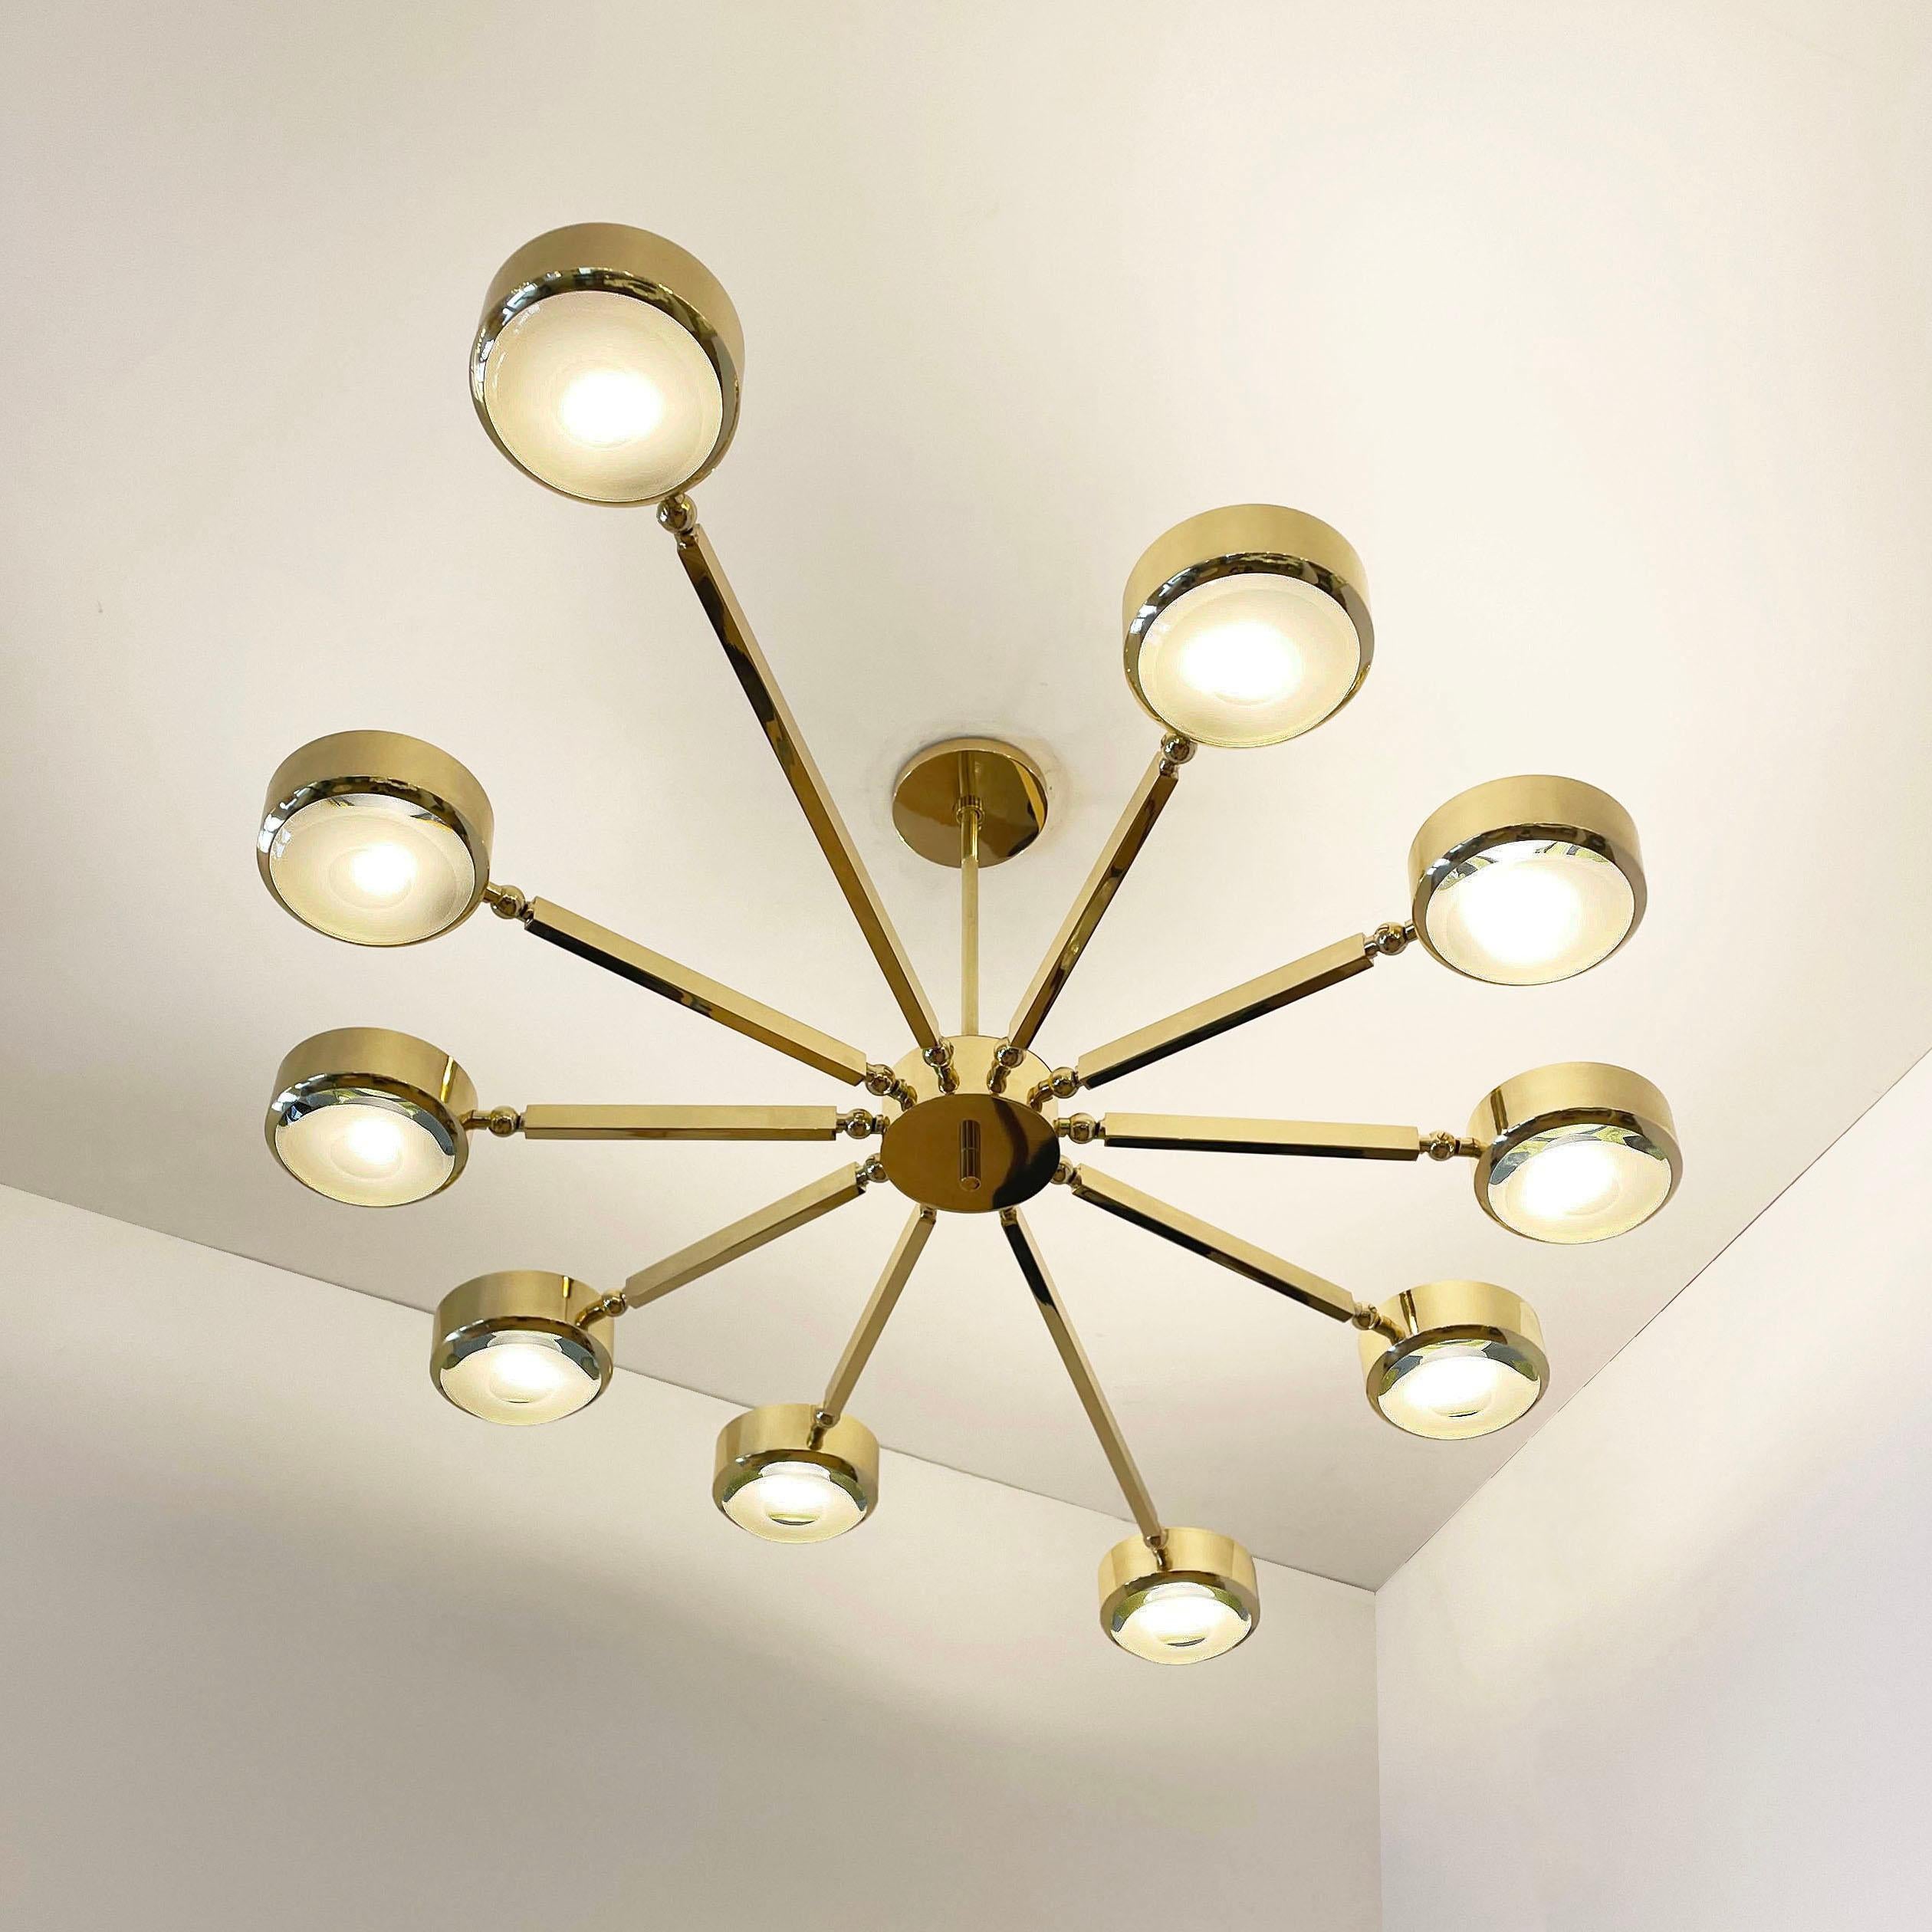 Brass Oculus Oval Ceiling Light by Gaspare Asaro- Polished Nickel with Carved Glass For Sale